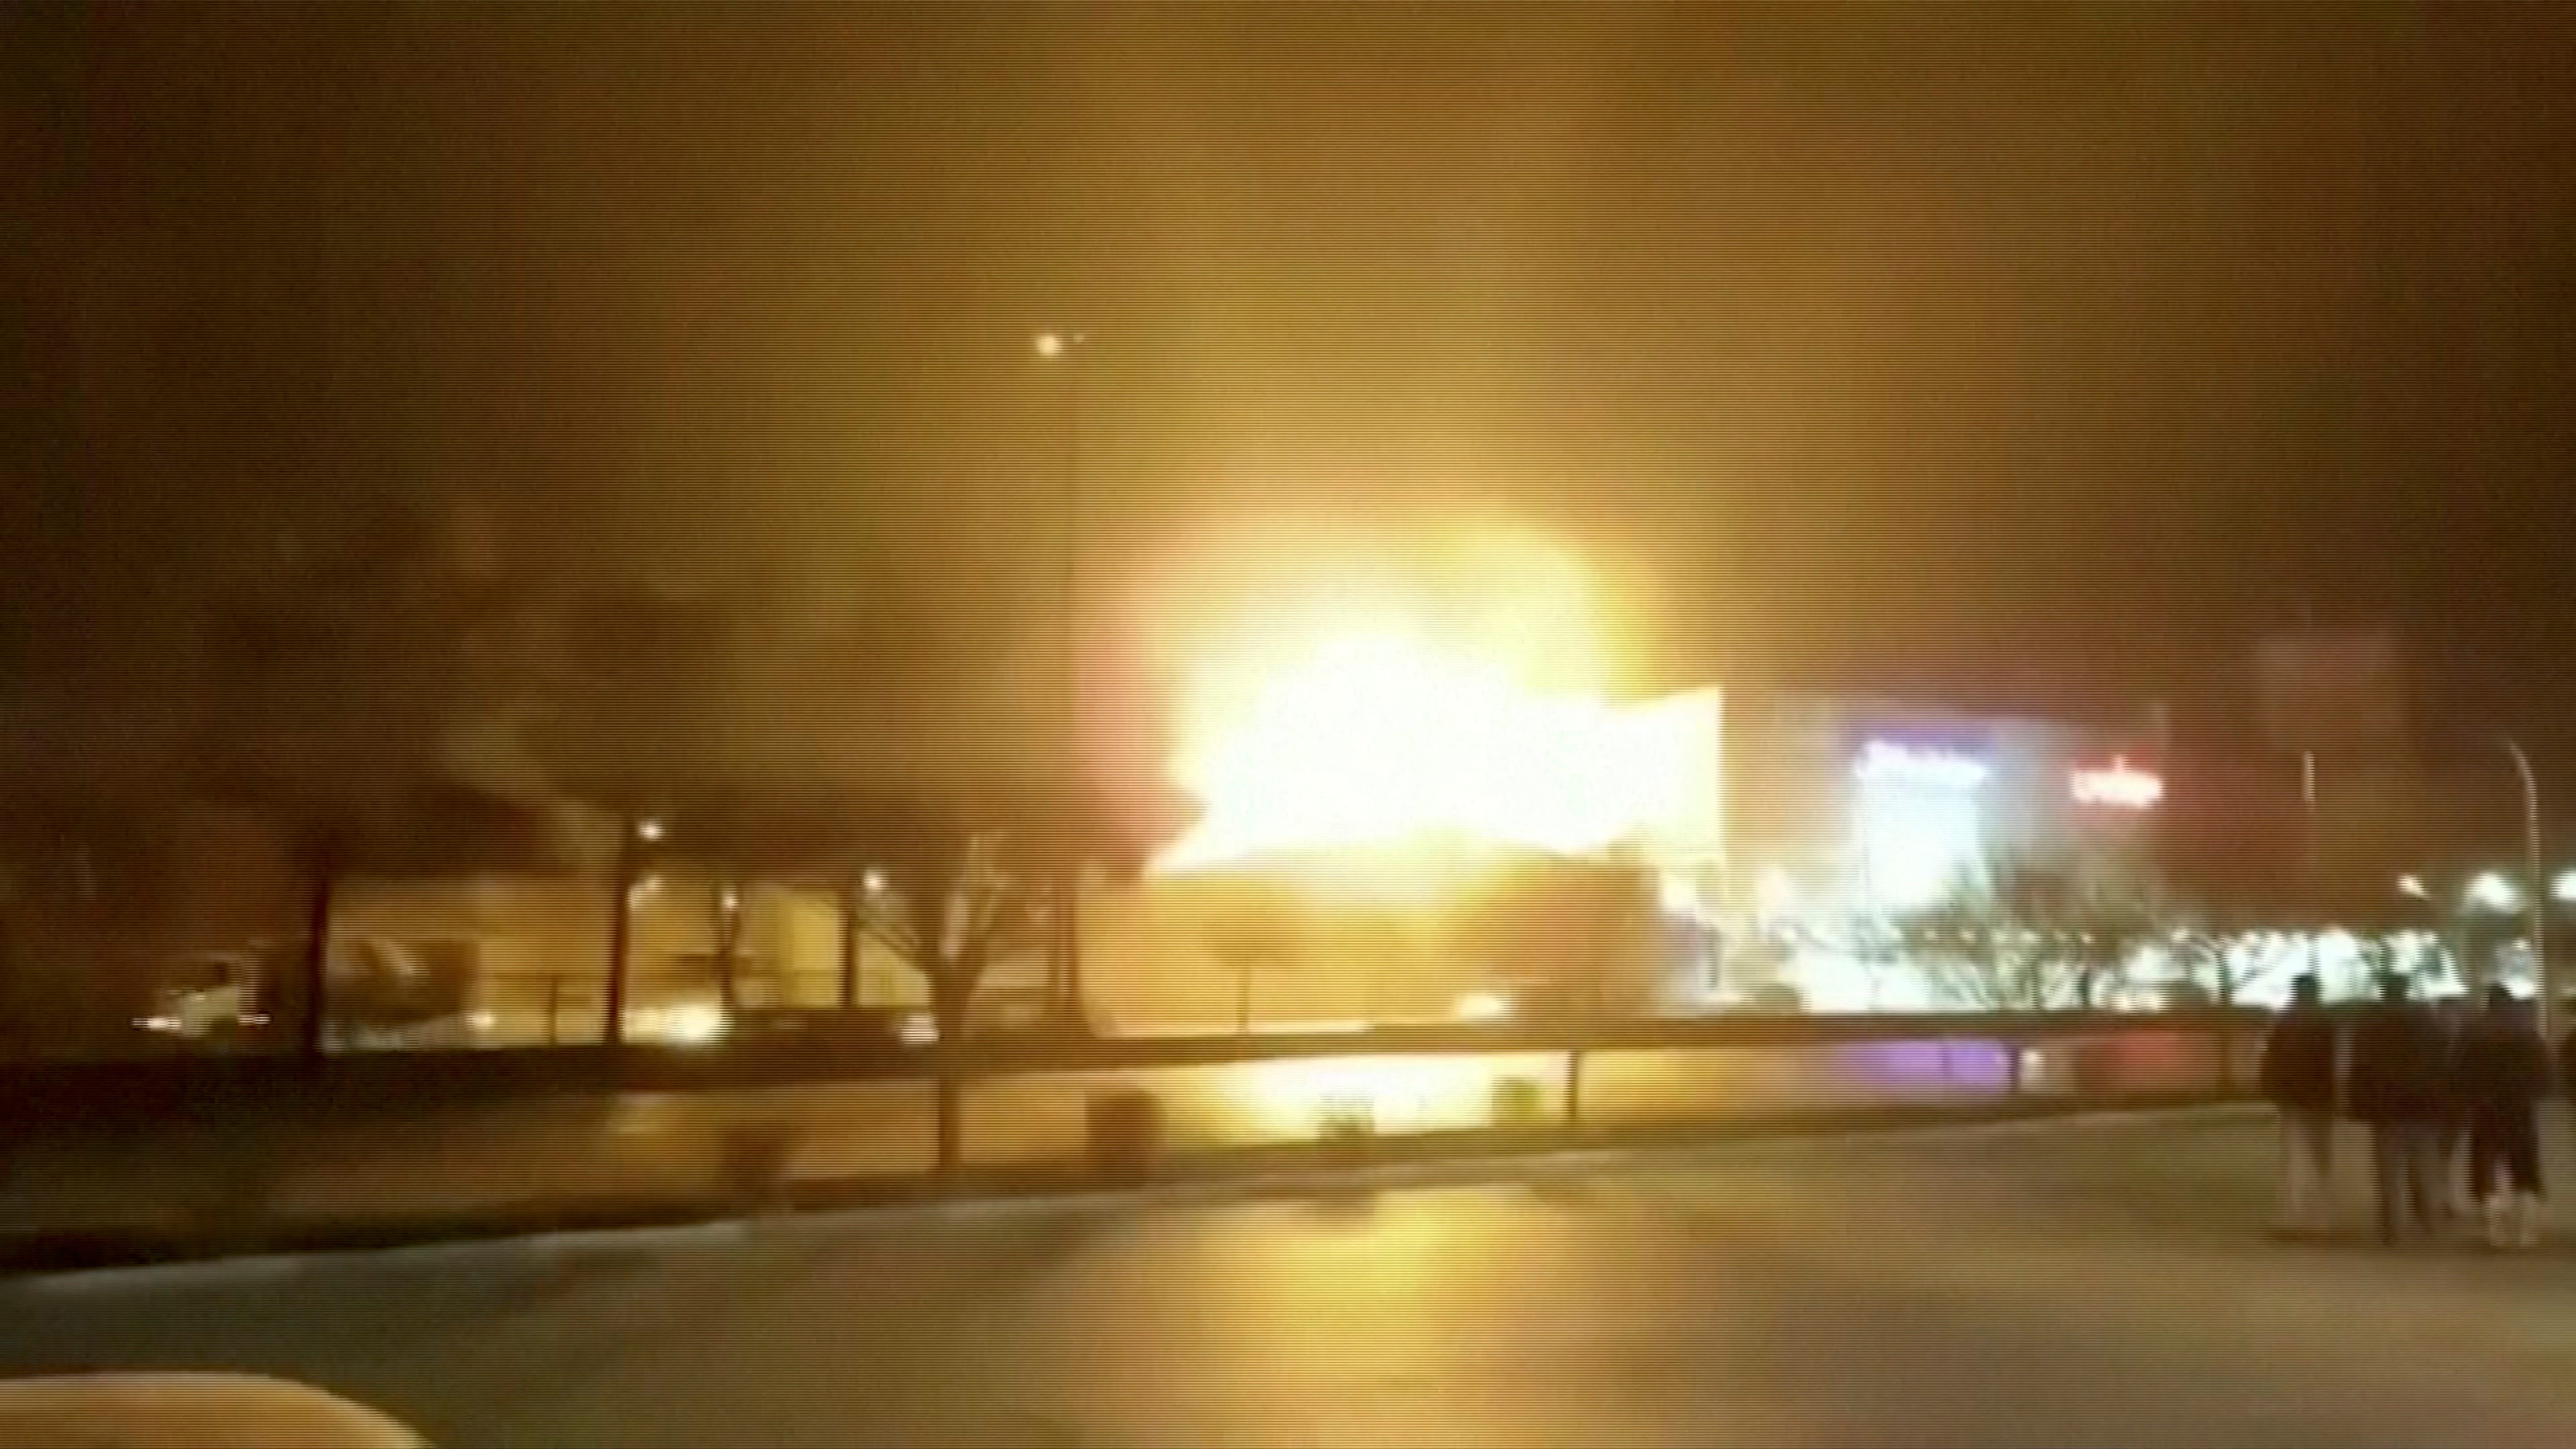 Eyewitness footage said to show moment of explosion at military industry factory in Isfahan